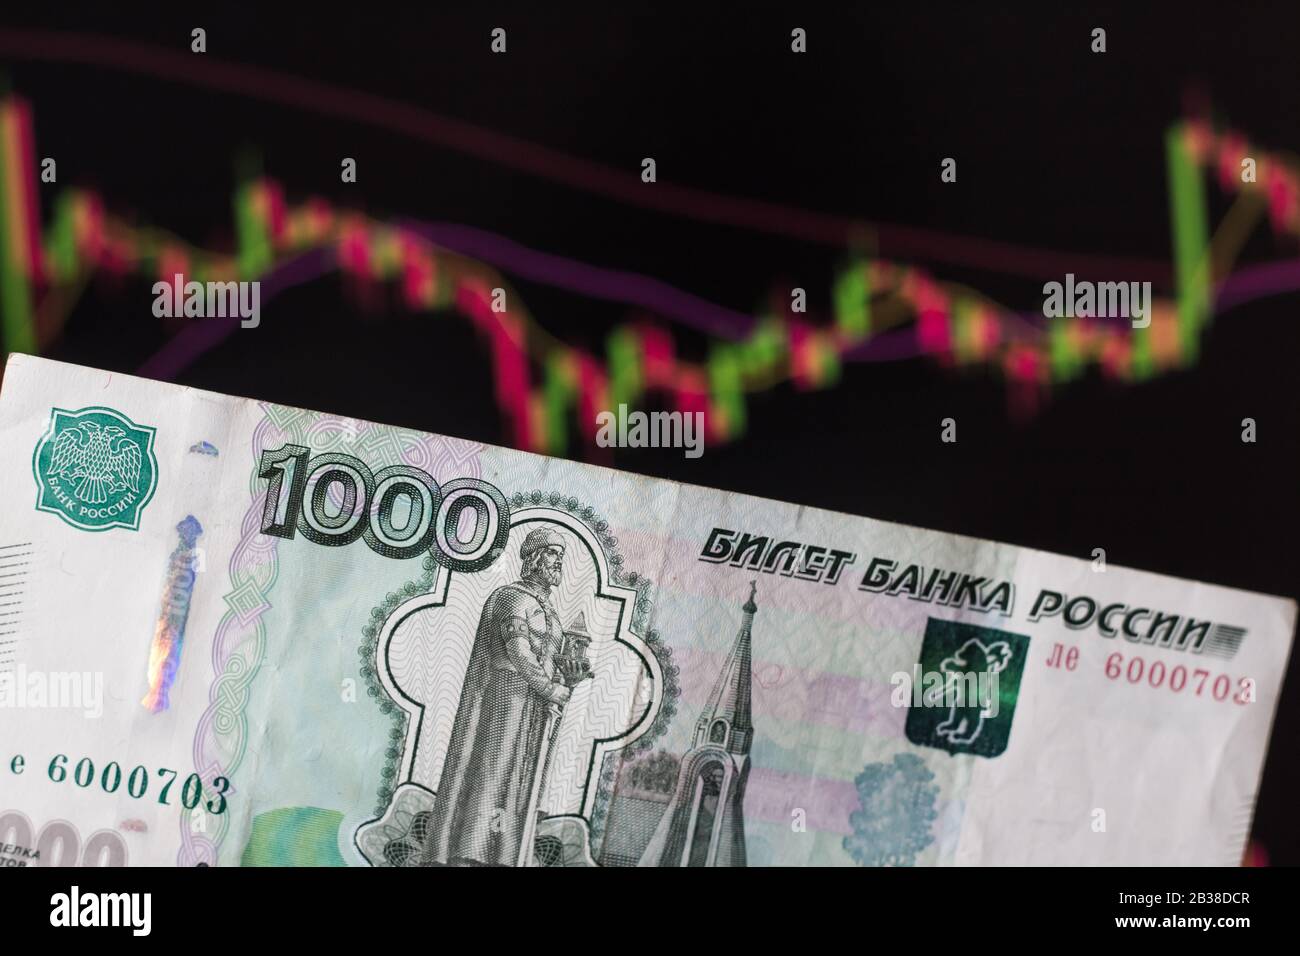 rubles on forex